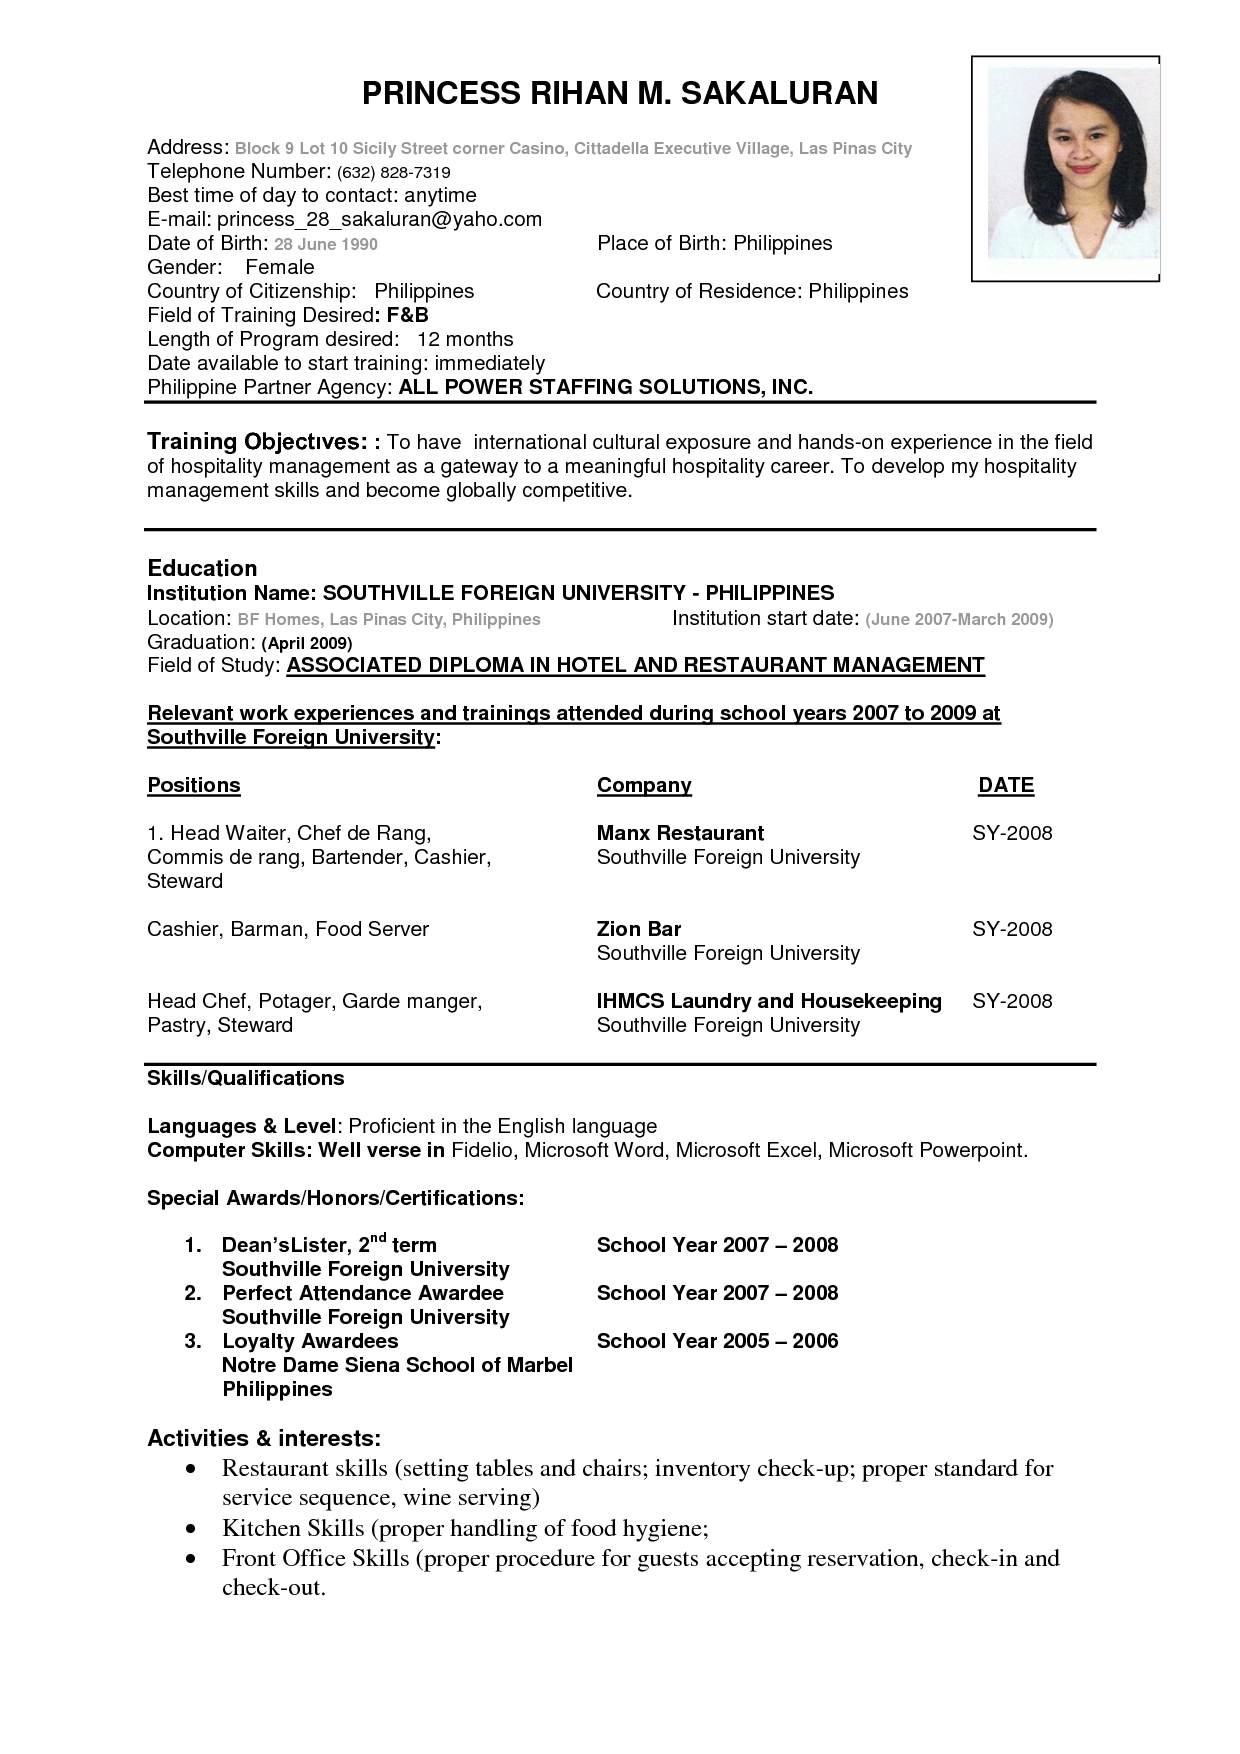 Resume Format For Usa Jobs  